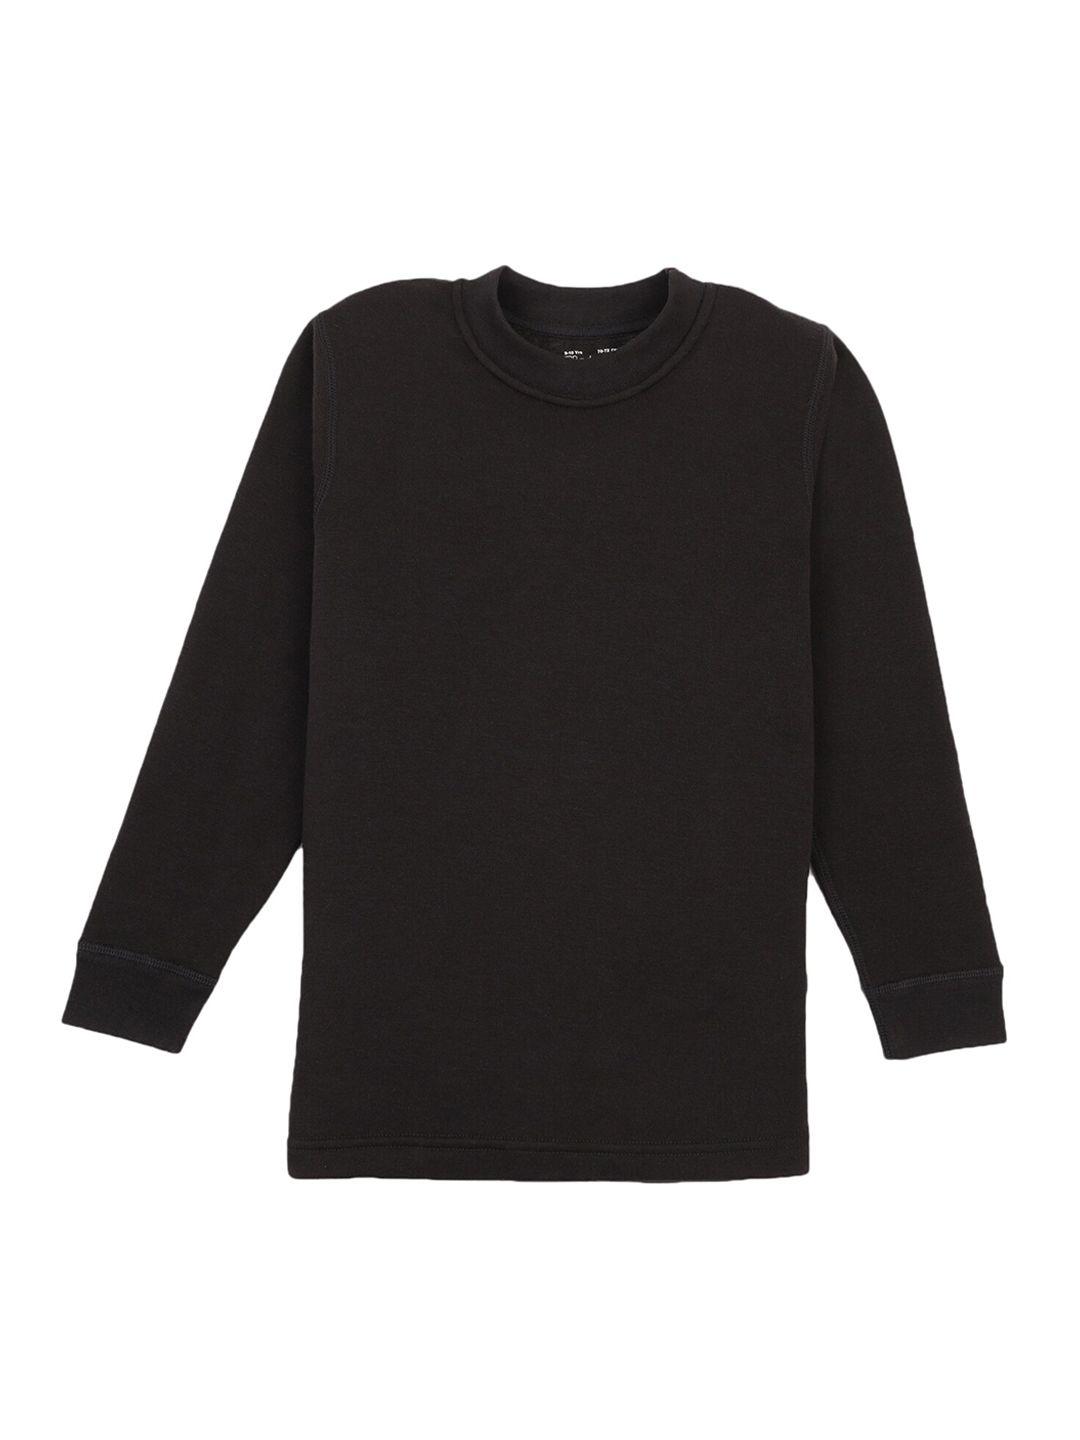 bodycare-kids-boys-black-solid-cotton-thermal-top